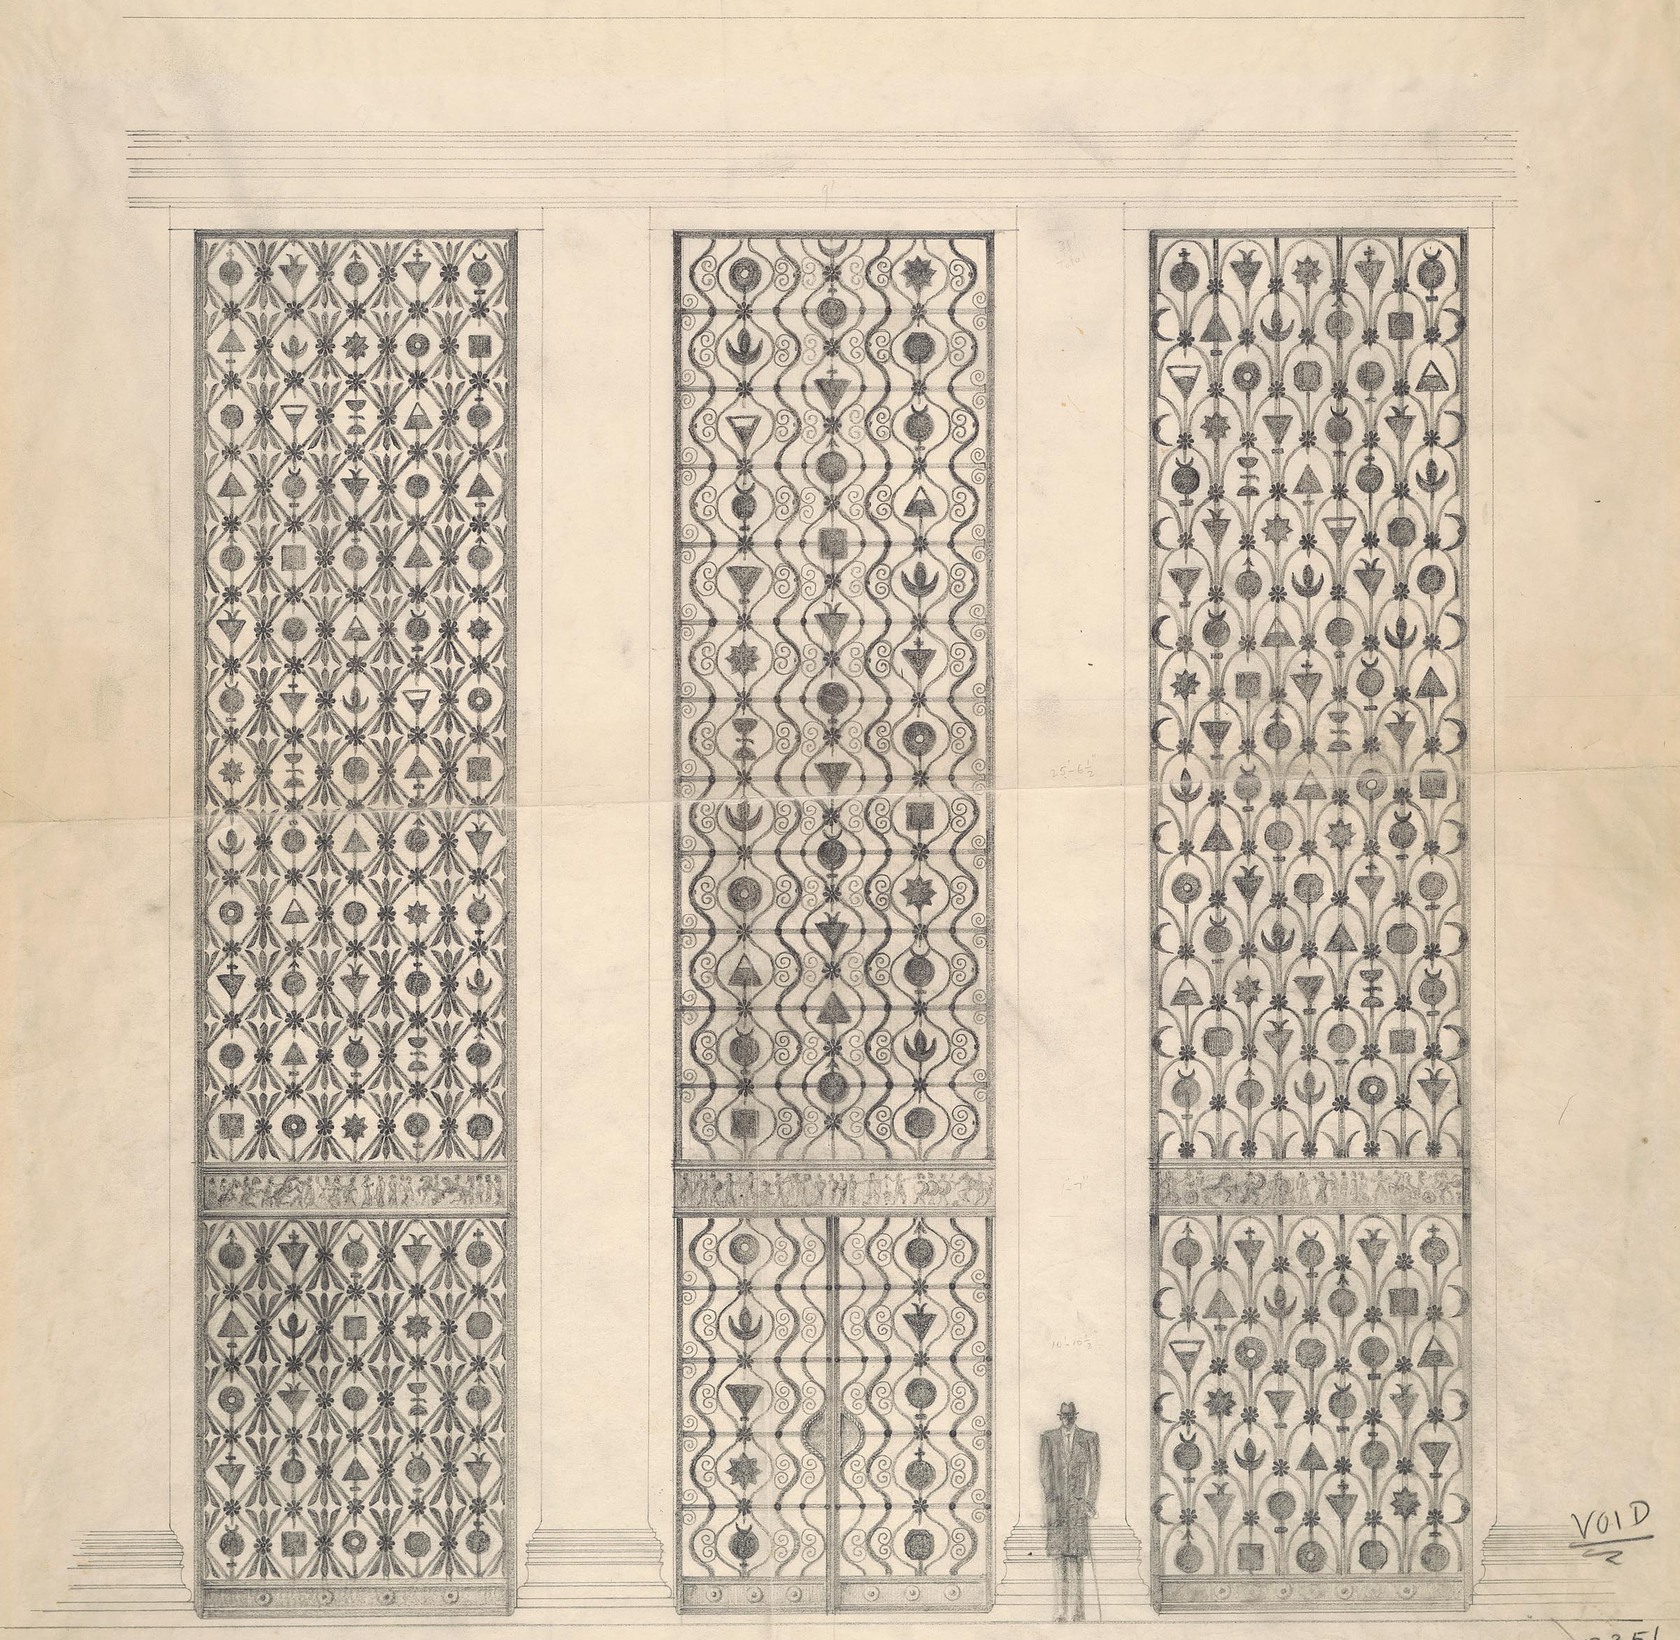 Samuel Yellin, Design drawing for metalwork for the Mellon Institute of Industrial Research